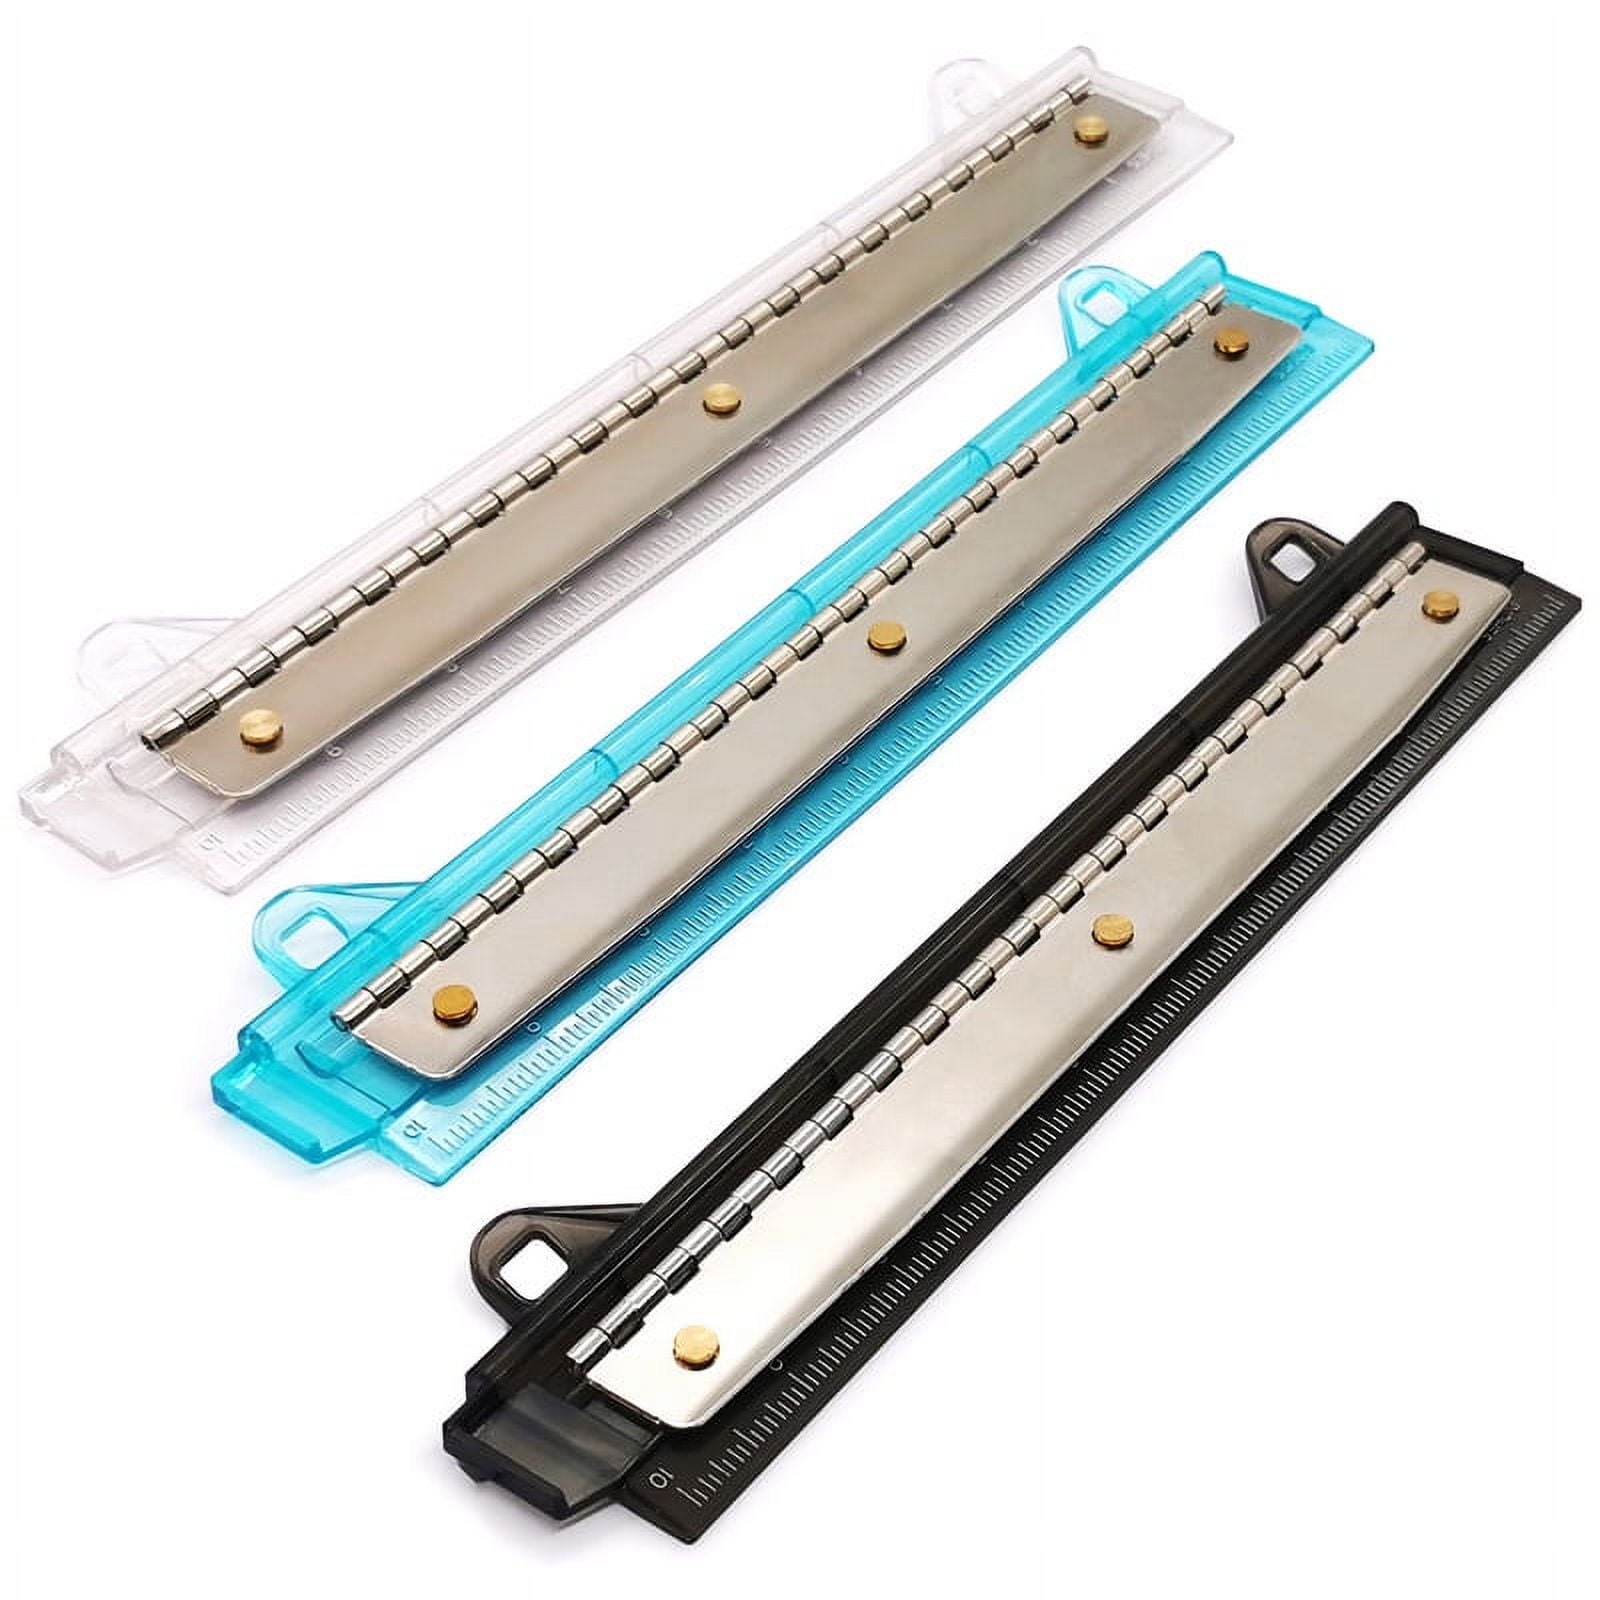 9 Staples 3-Hole Punch Fits in 3-Ring Binders Ruler 3 Sheet